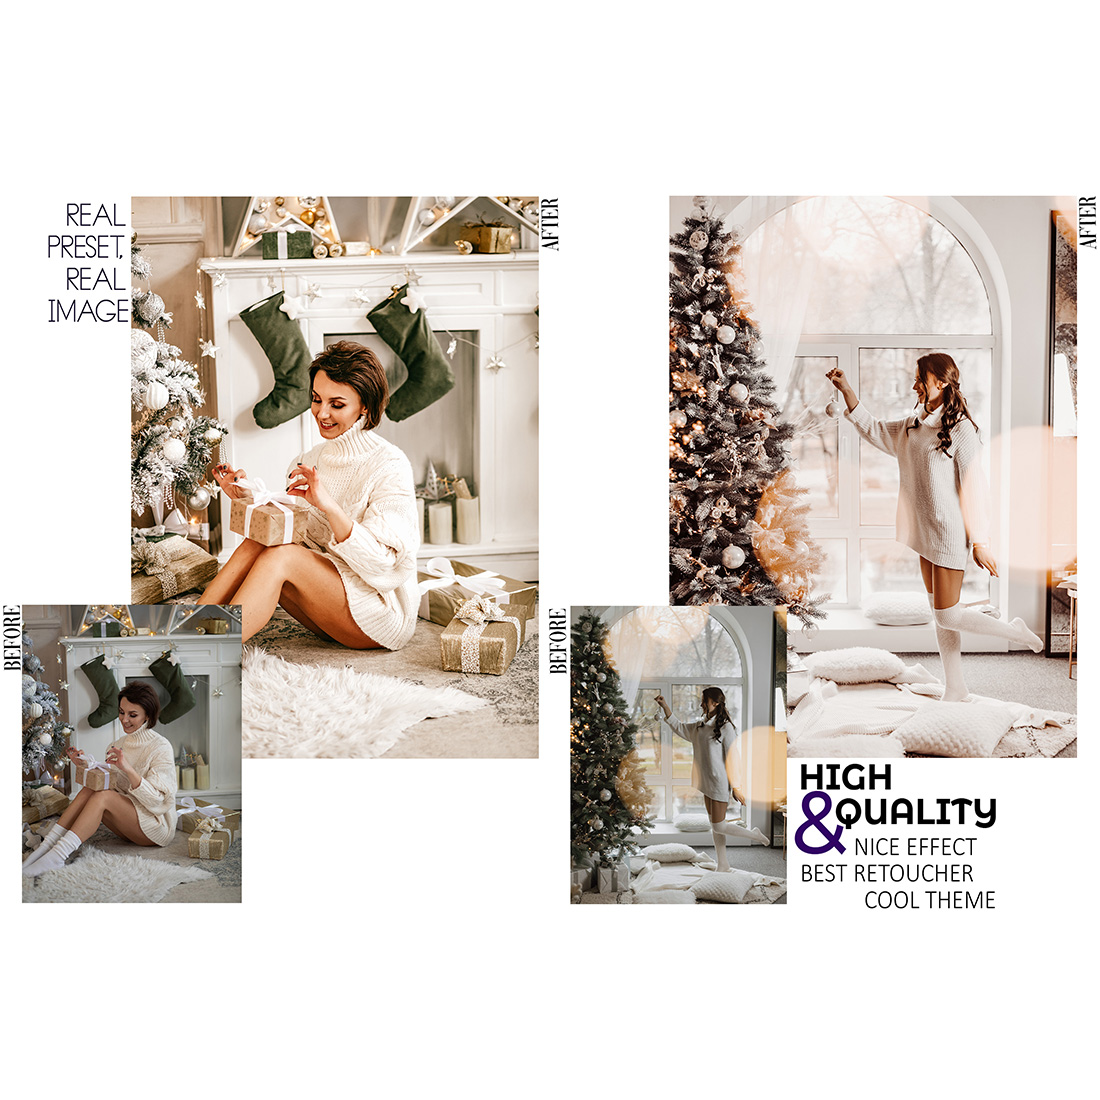 12 Photoshop Actions, Creamy Xmas Ps Action, Christmas ACR Preset, Winter Ps Filter, Atn Portrait And Lifestyle Theme Instagram, Blogger preview image.